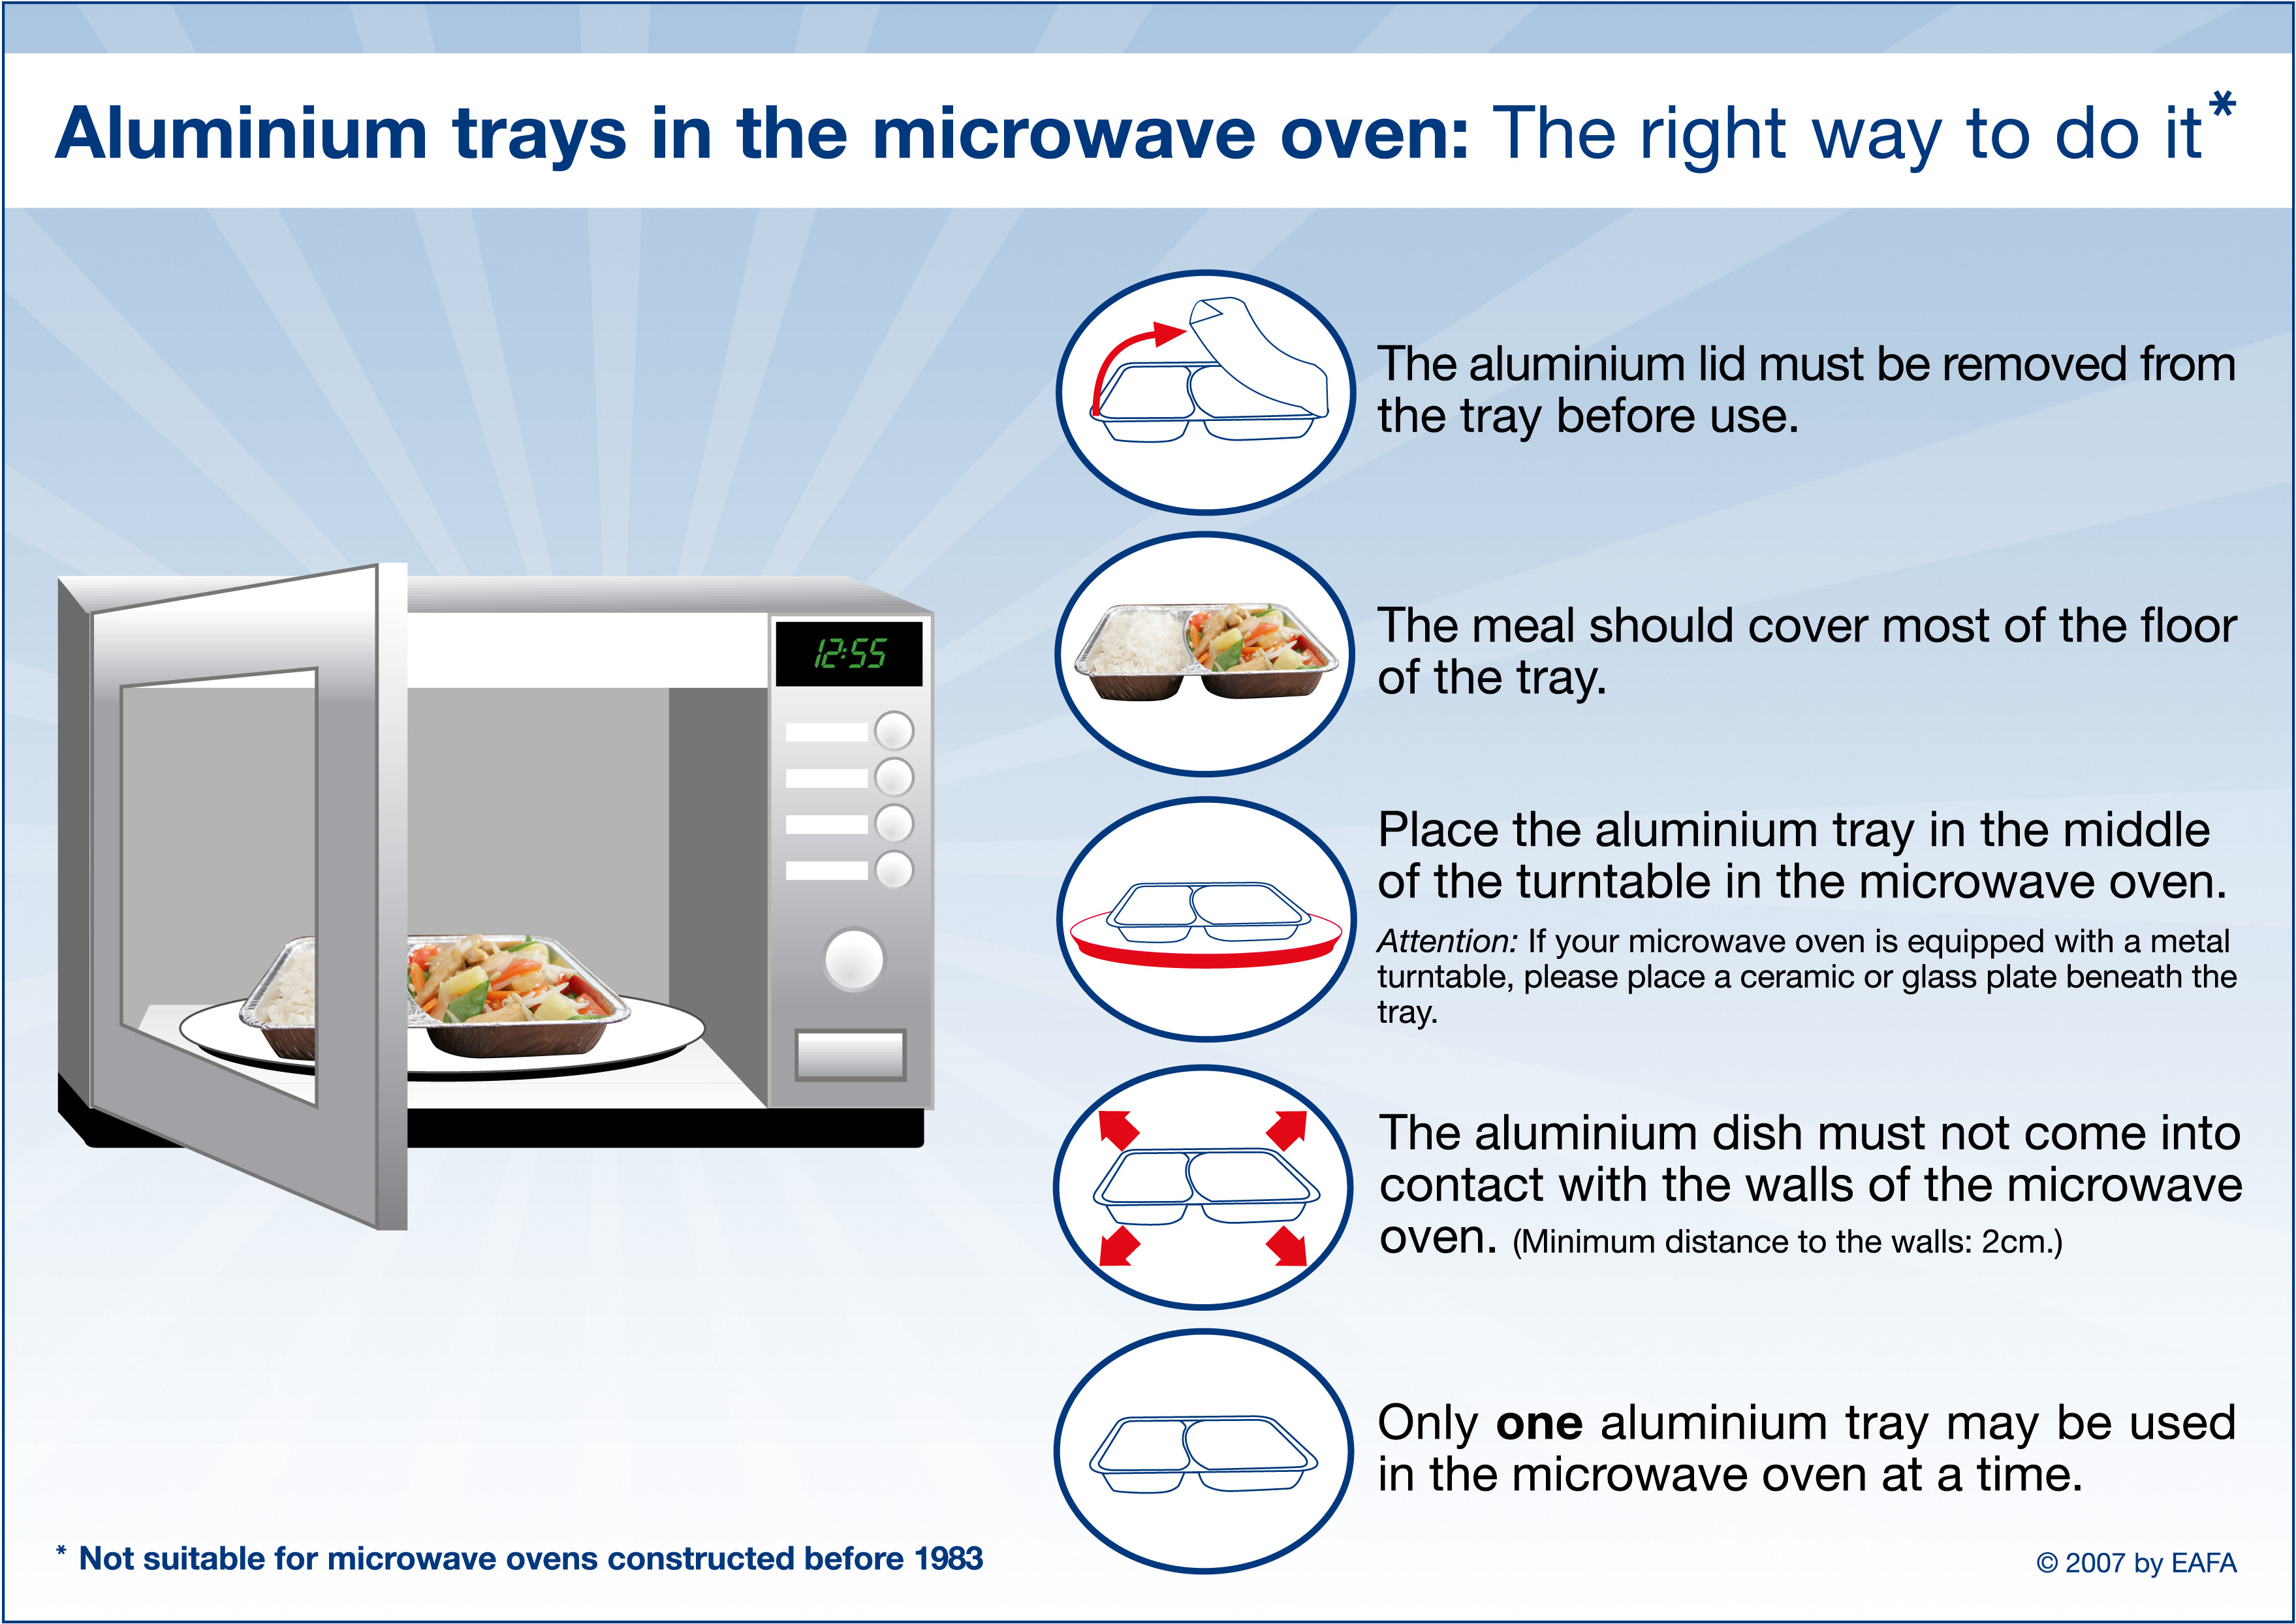 Aluminium Trays in the Microwave Oven - The Right Way to Do It